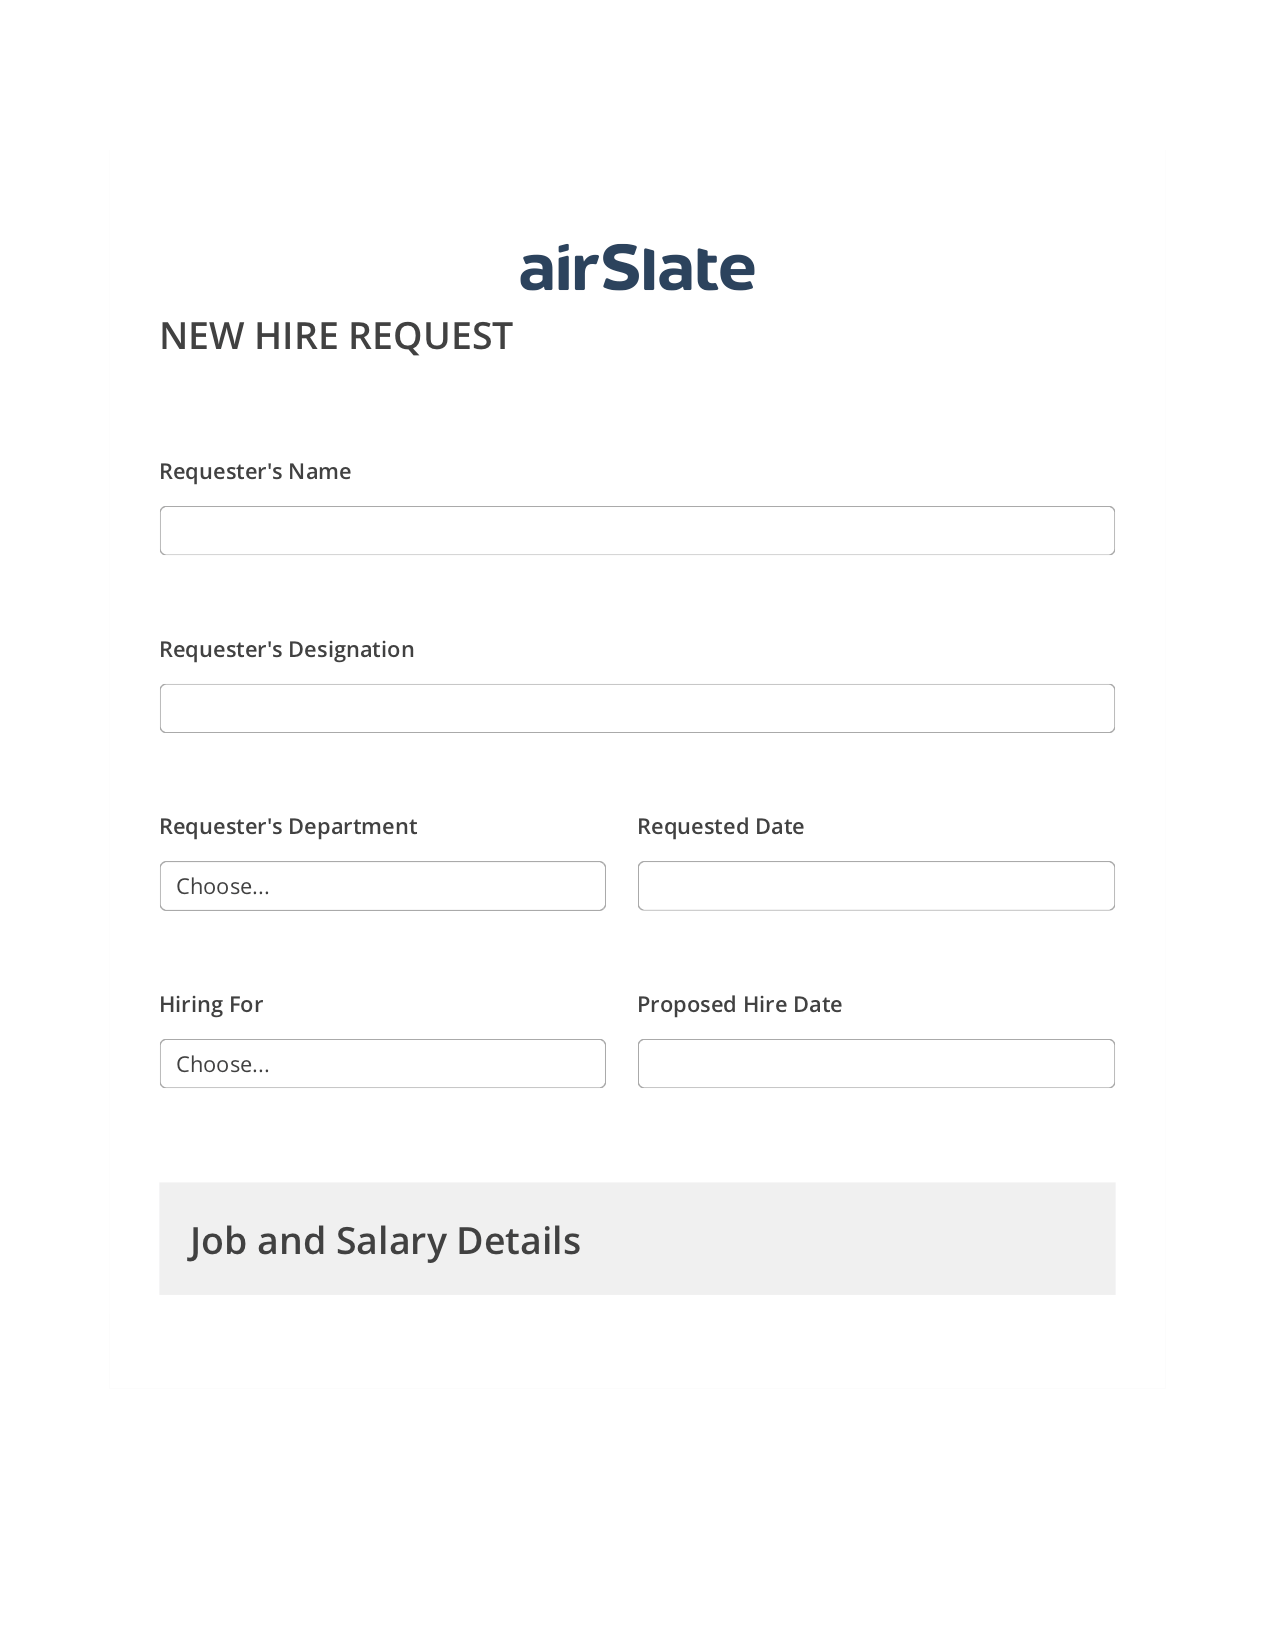 Hiring Request Workflow Pre-fill from Excel Spreadsheet Bot, Rename Slate Bot, Archive to SharePoint Folder Bot